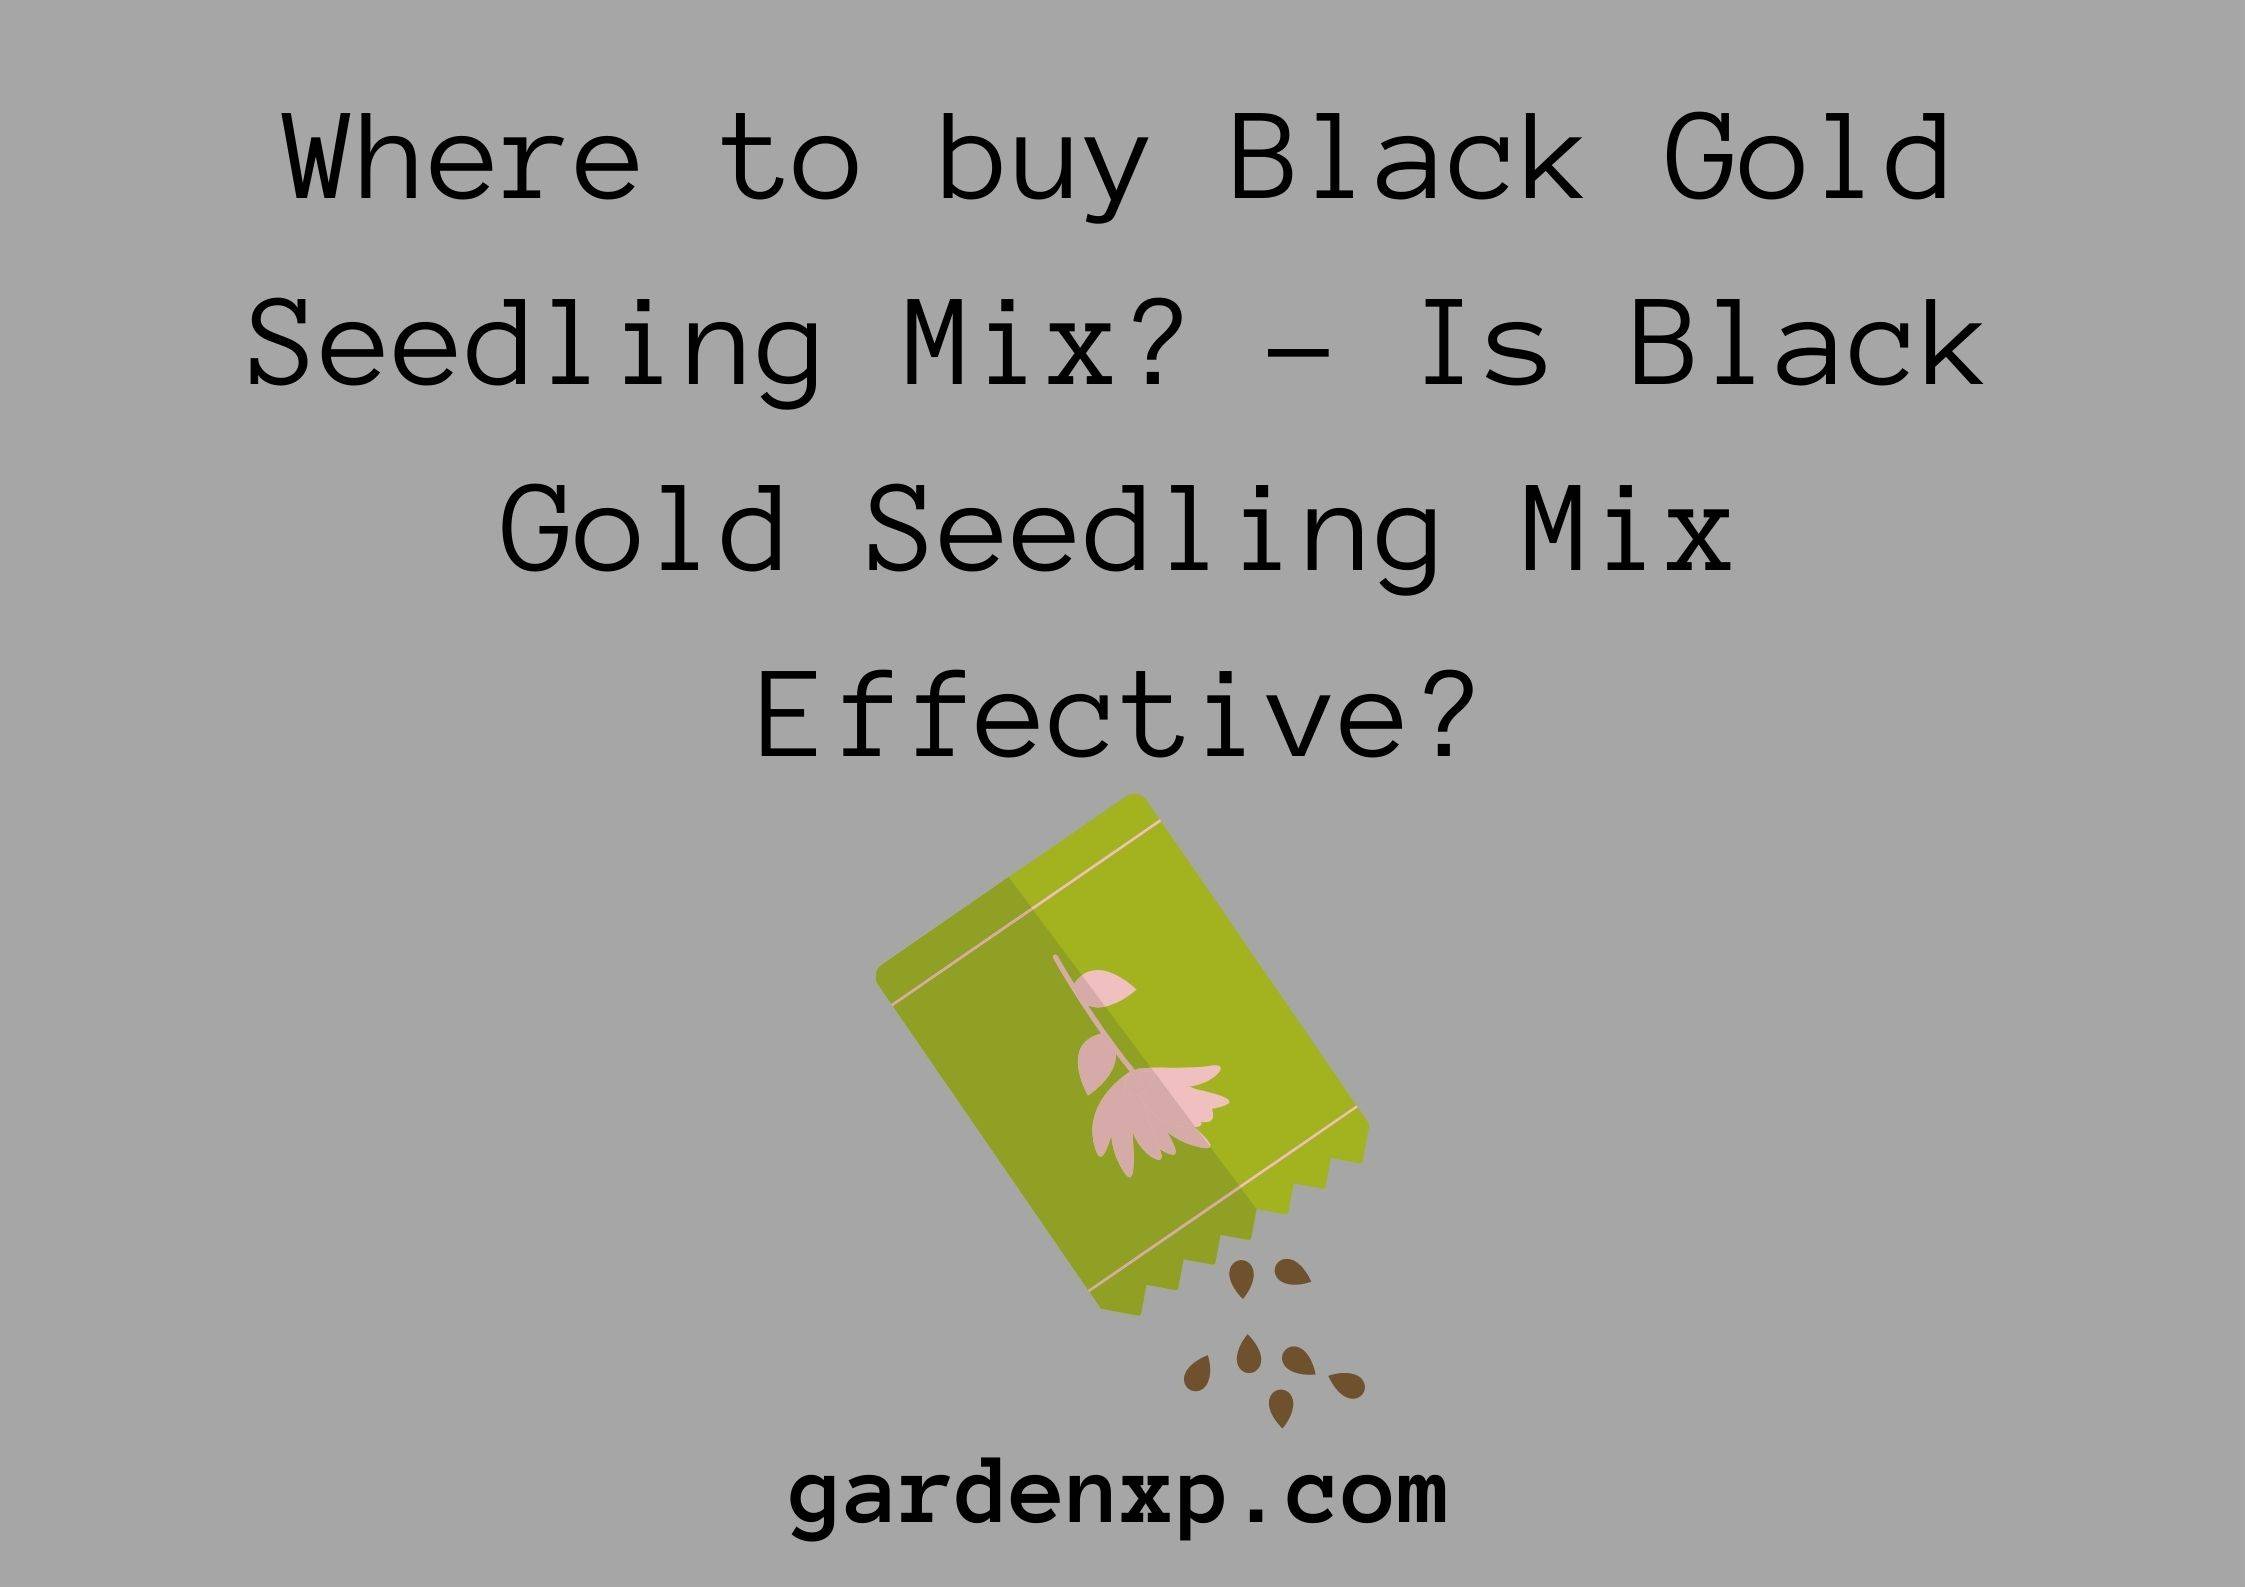 Where to buy Black Gold Seedling Mix? - Is Black Gold Seedling Mix Effective?